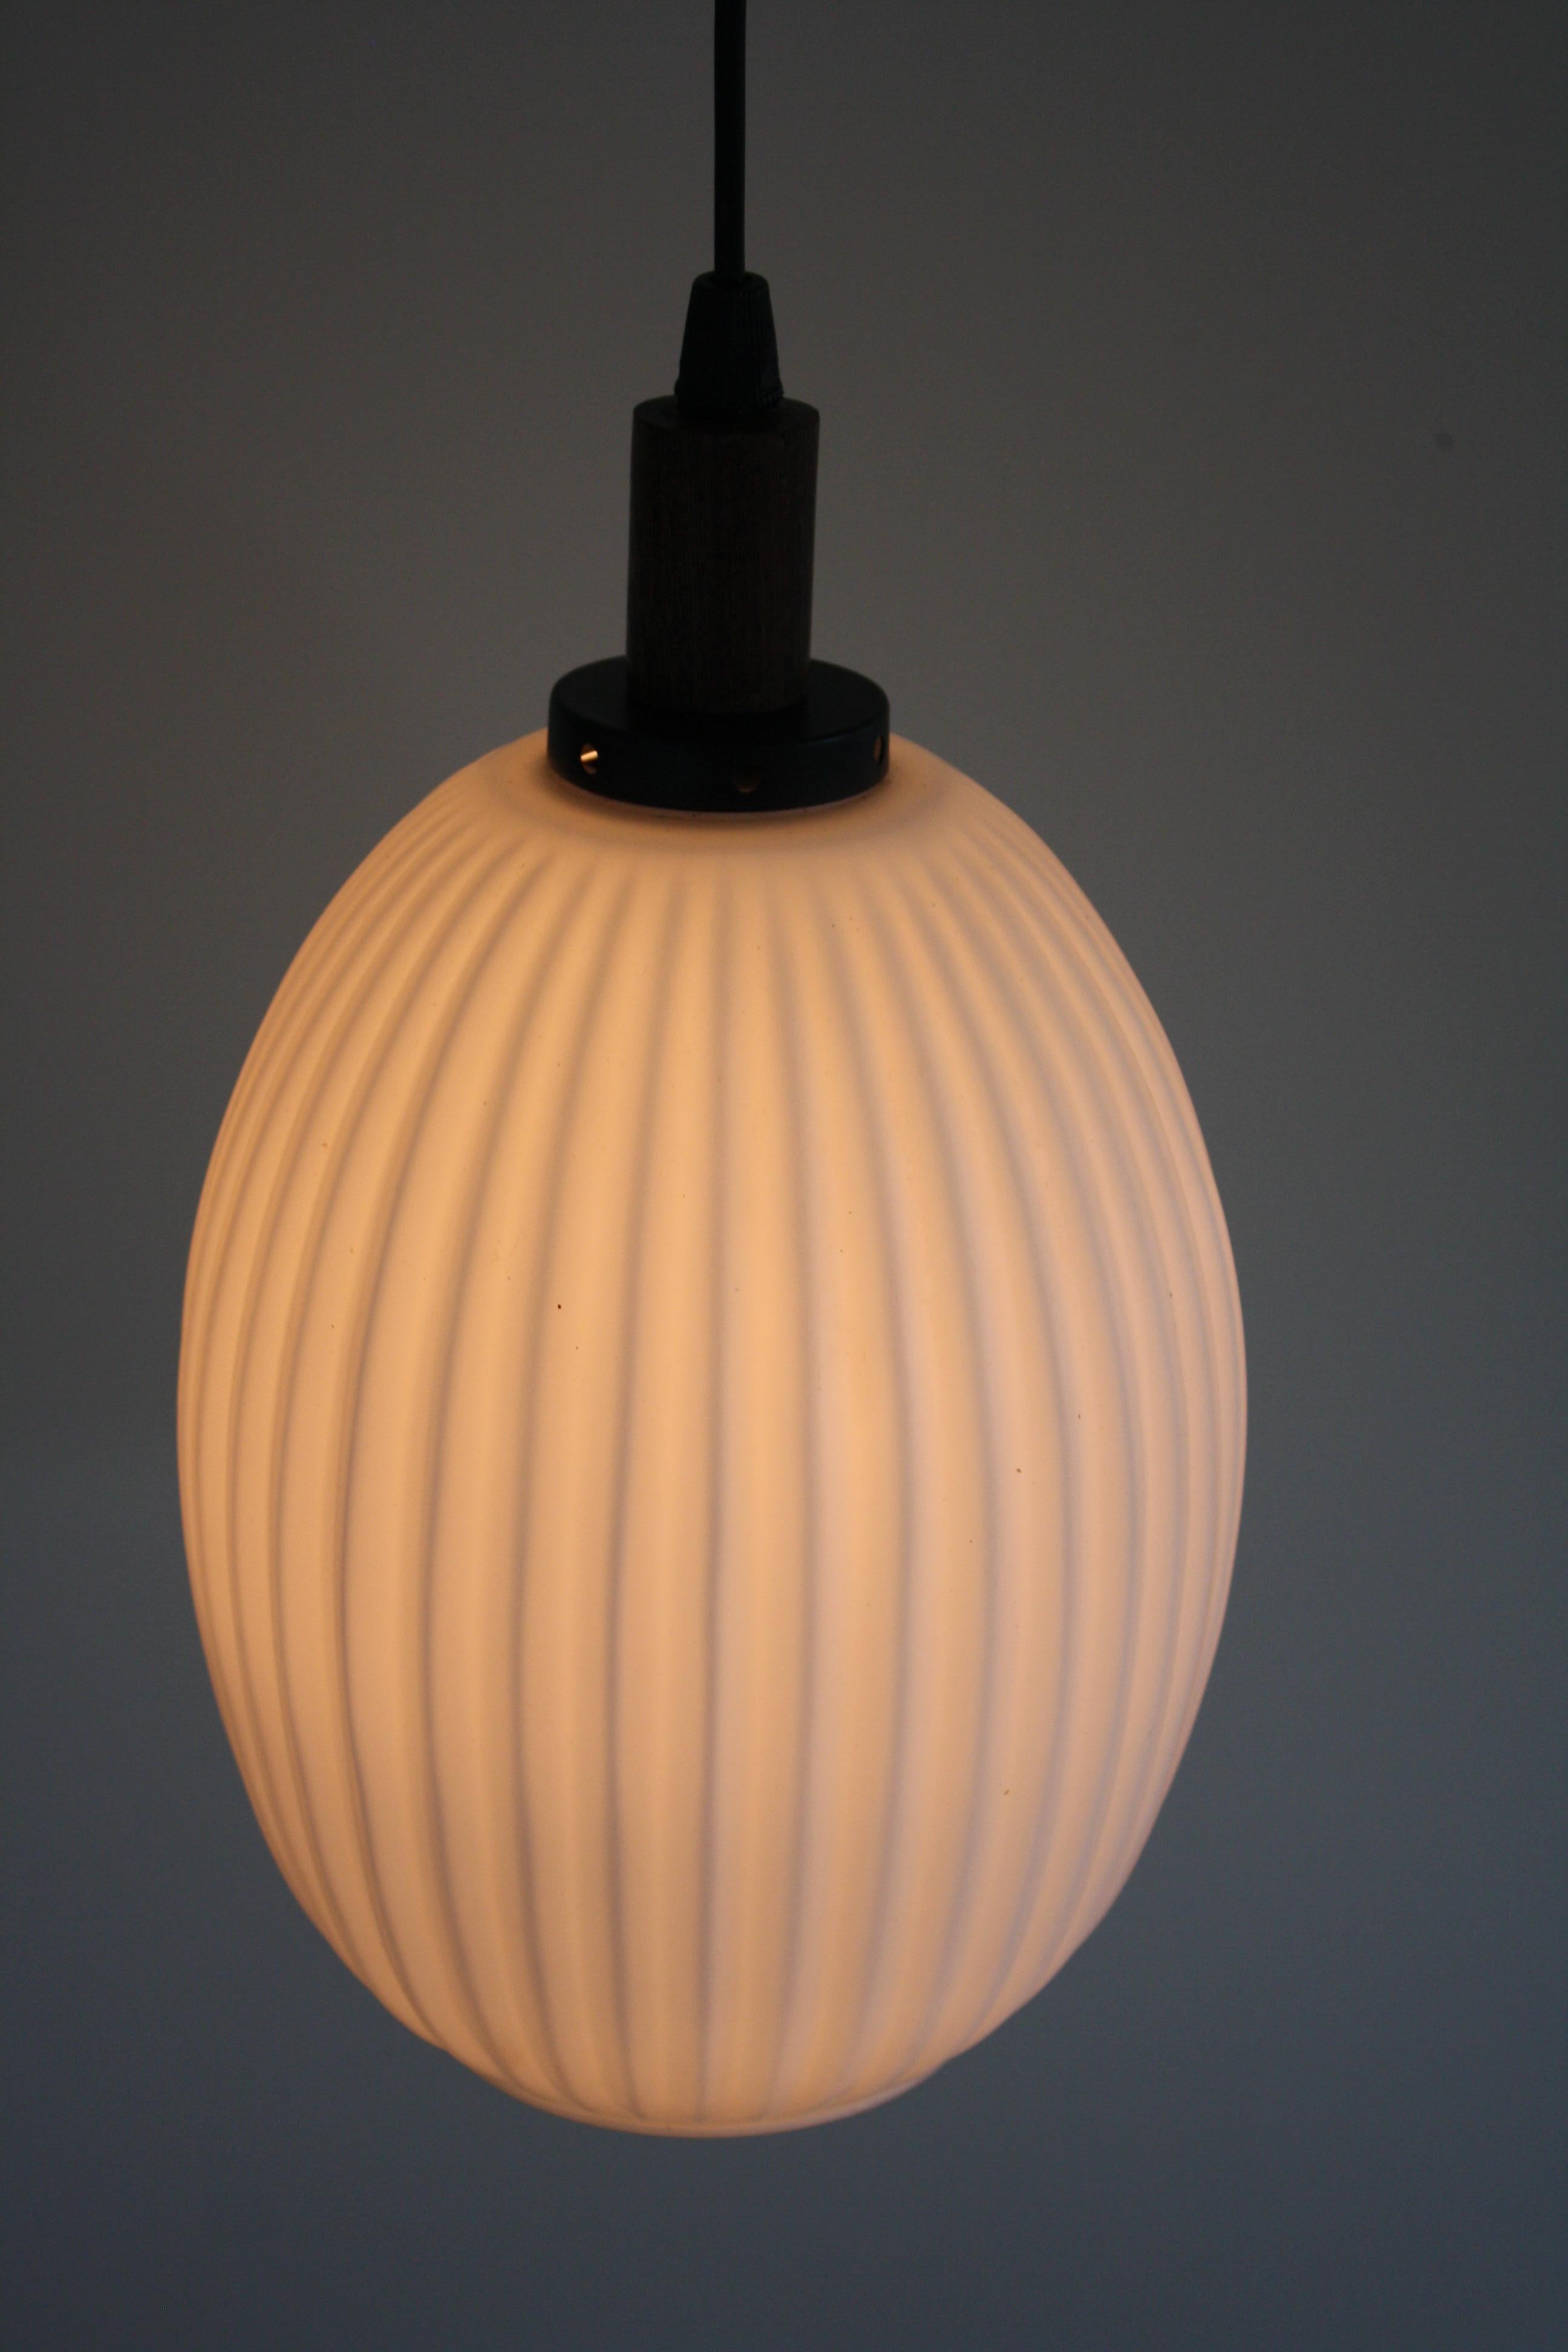 Charming midcentury ribbed pendant light.

It features a milk glass shade with a teak shade holder.

1960s - Denmark

Perfect condition.

Tested and ready to use.

Measures: Height 32 cm/12.60 inch
Diameter shade 20 cm/7.90 inch

Ref.: scndnvntklmp